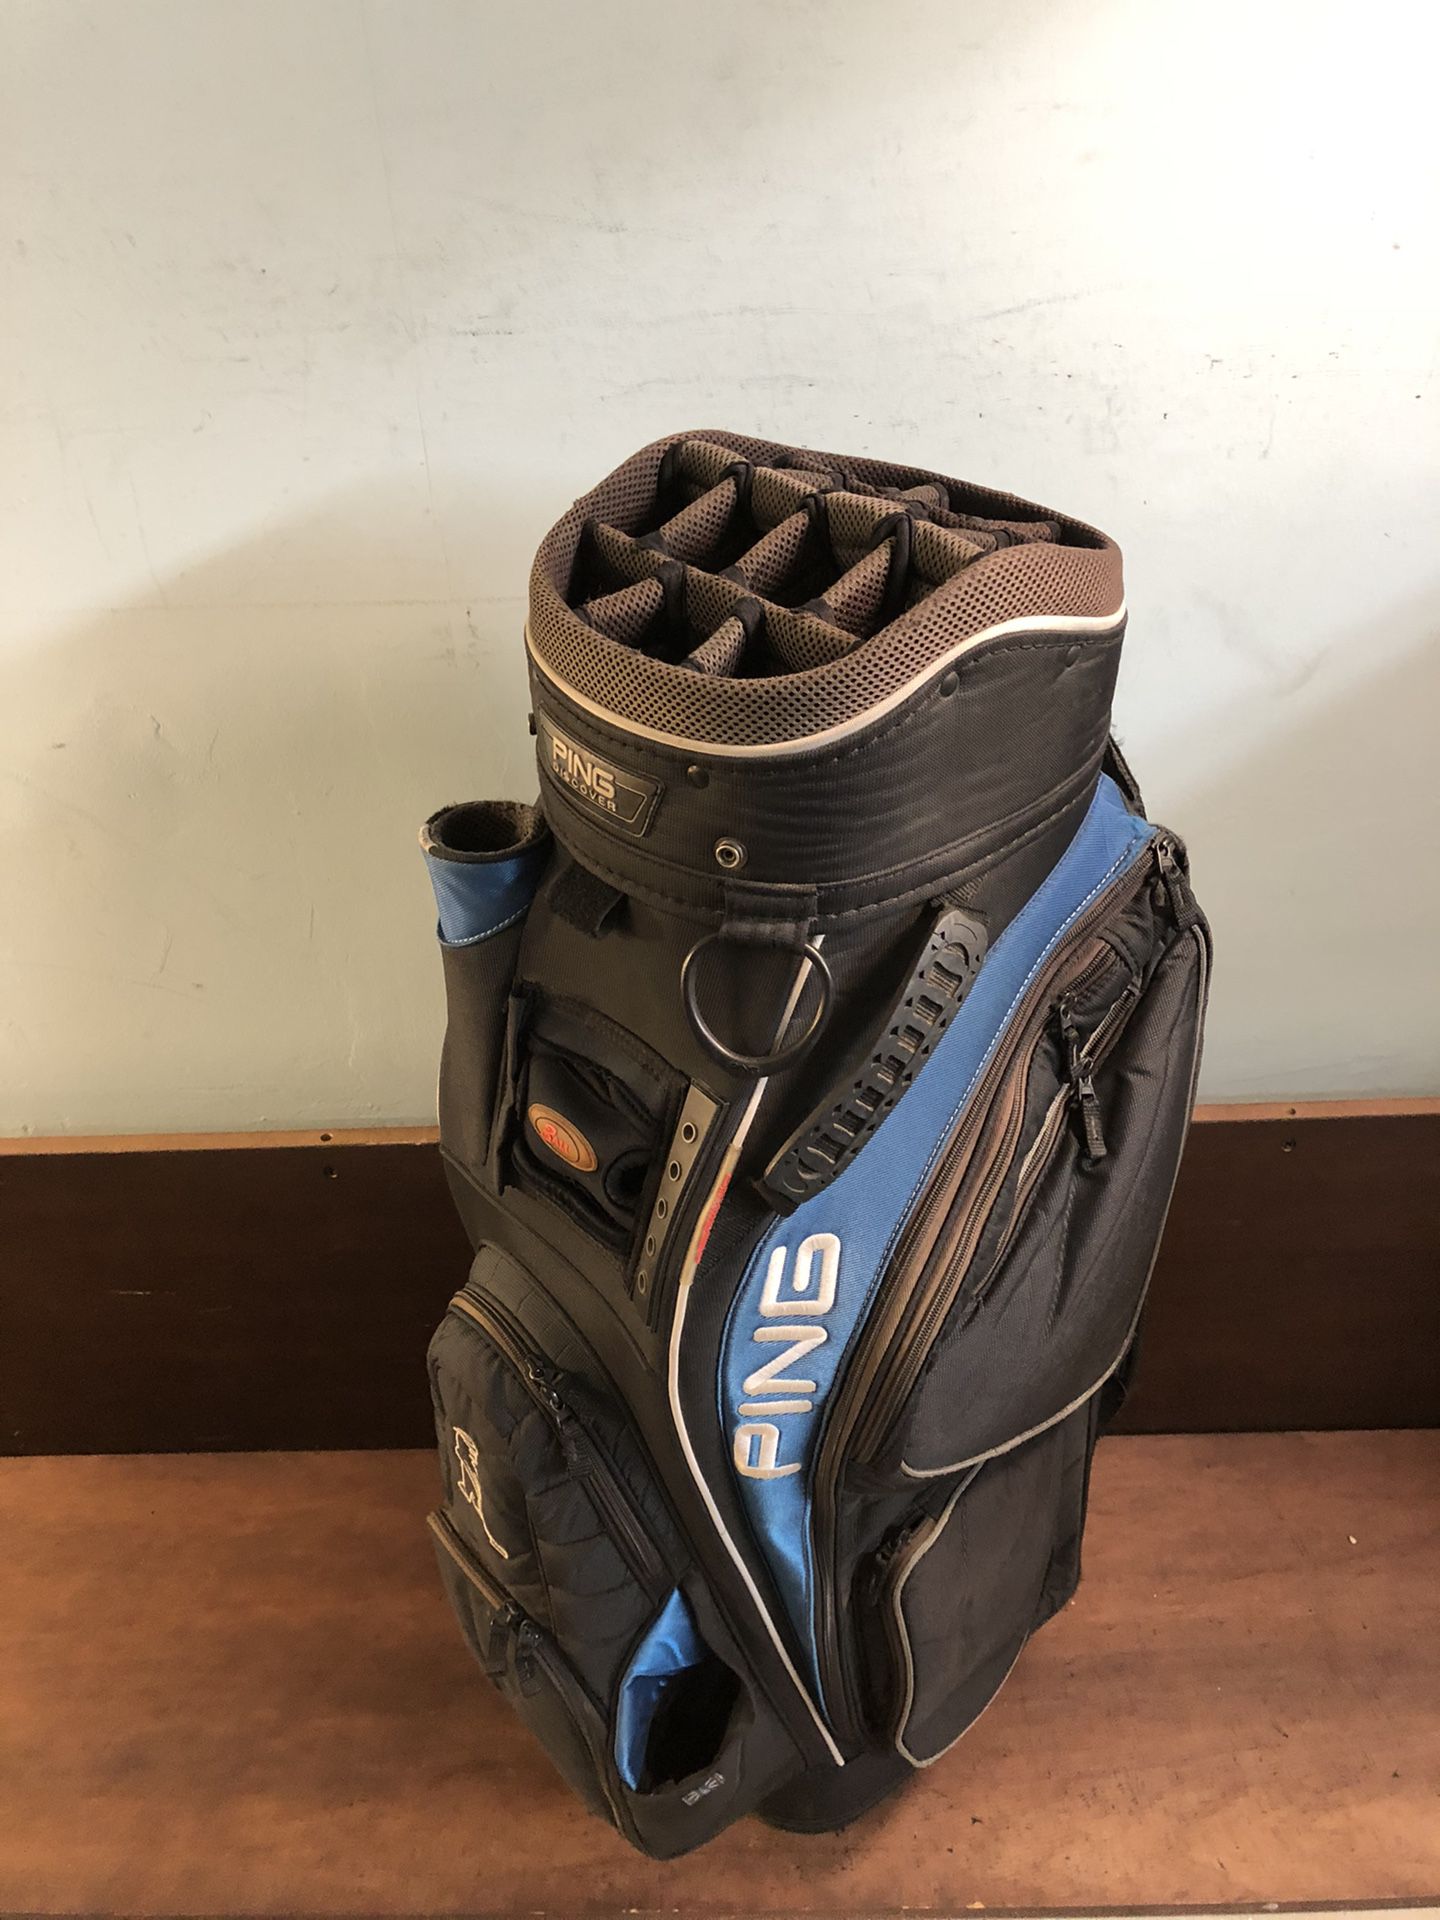 Ping Discover golf bag